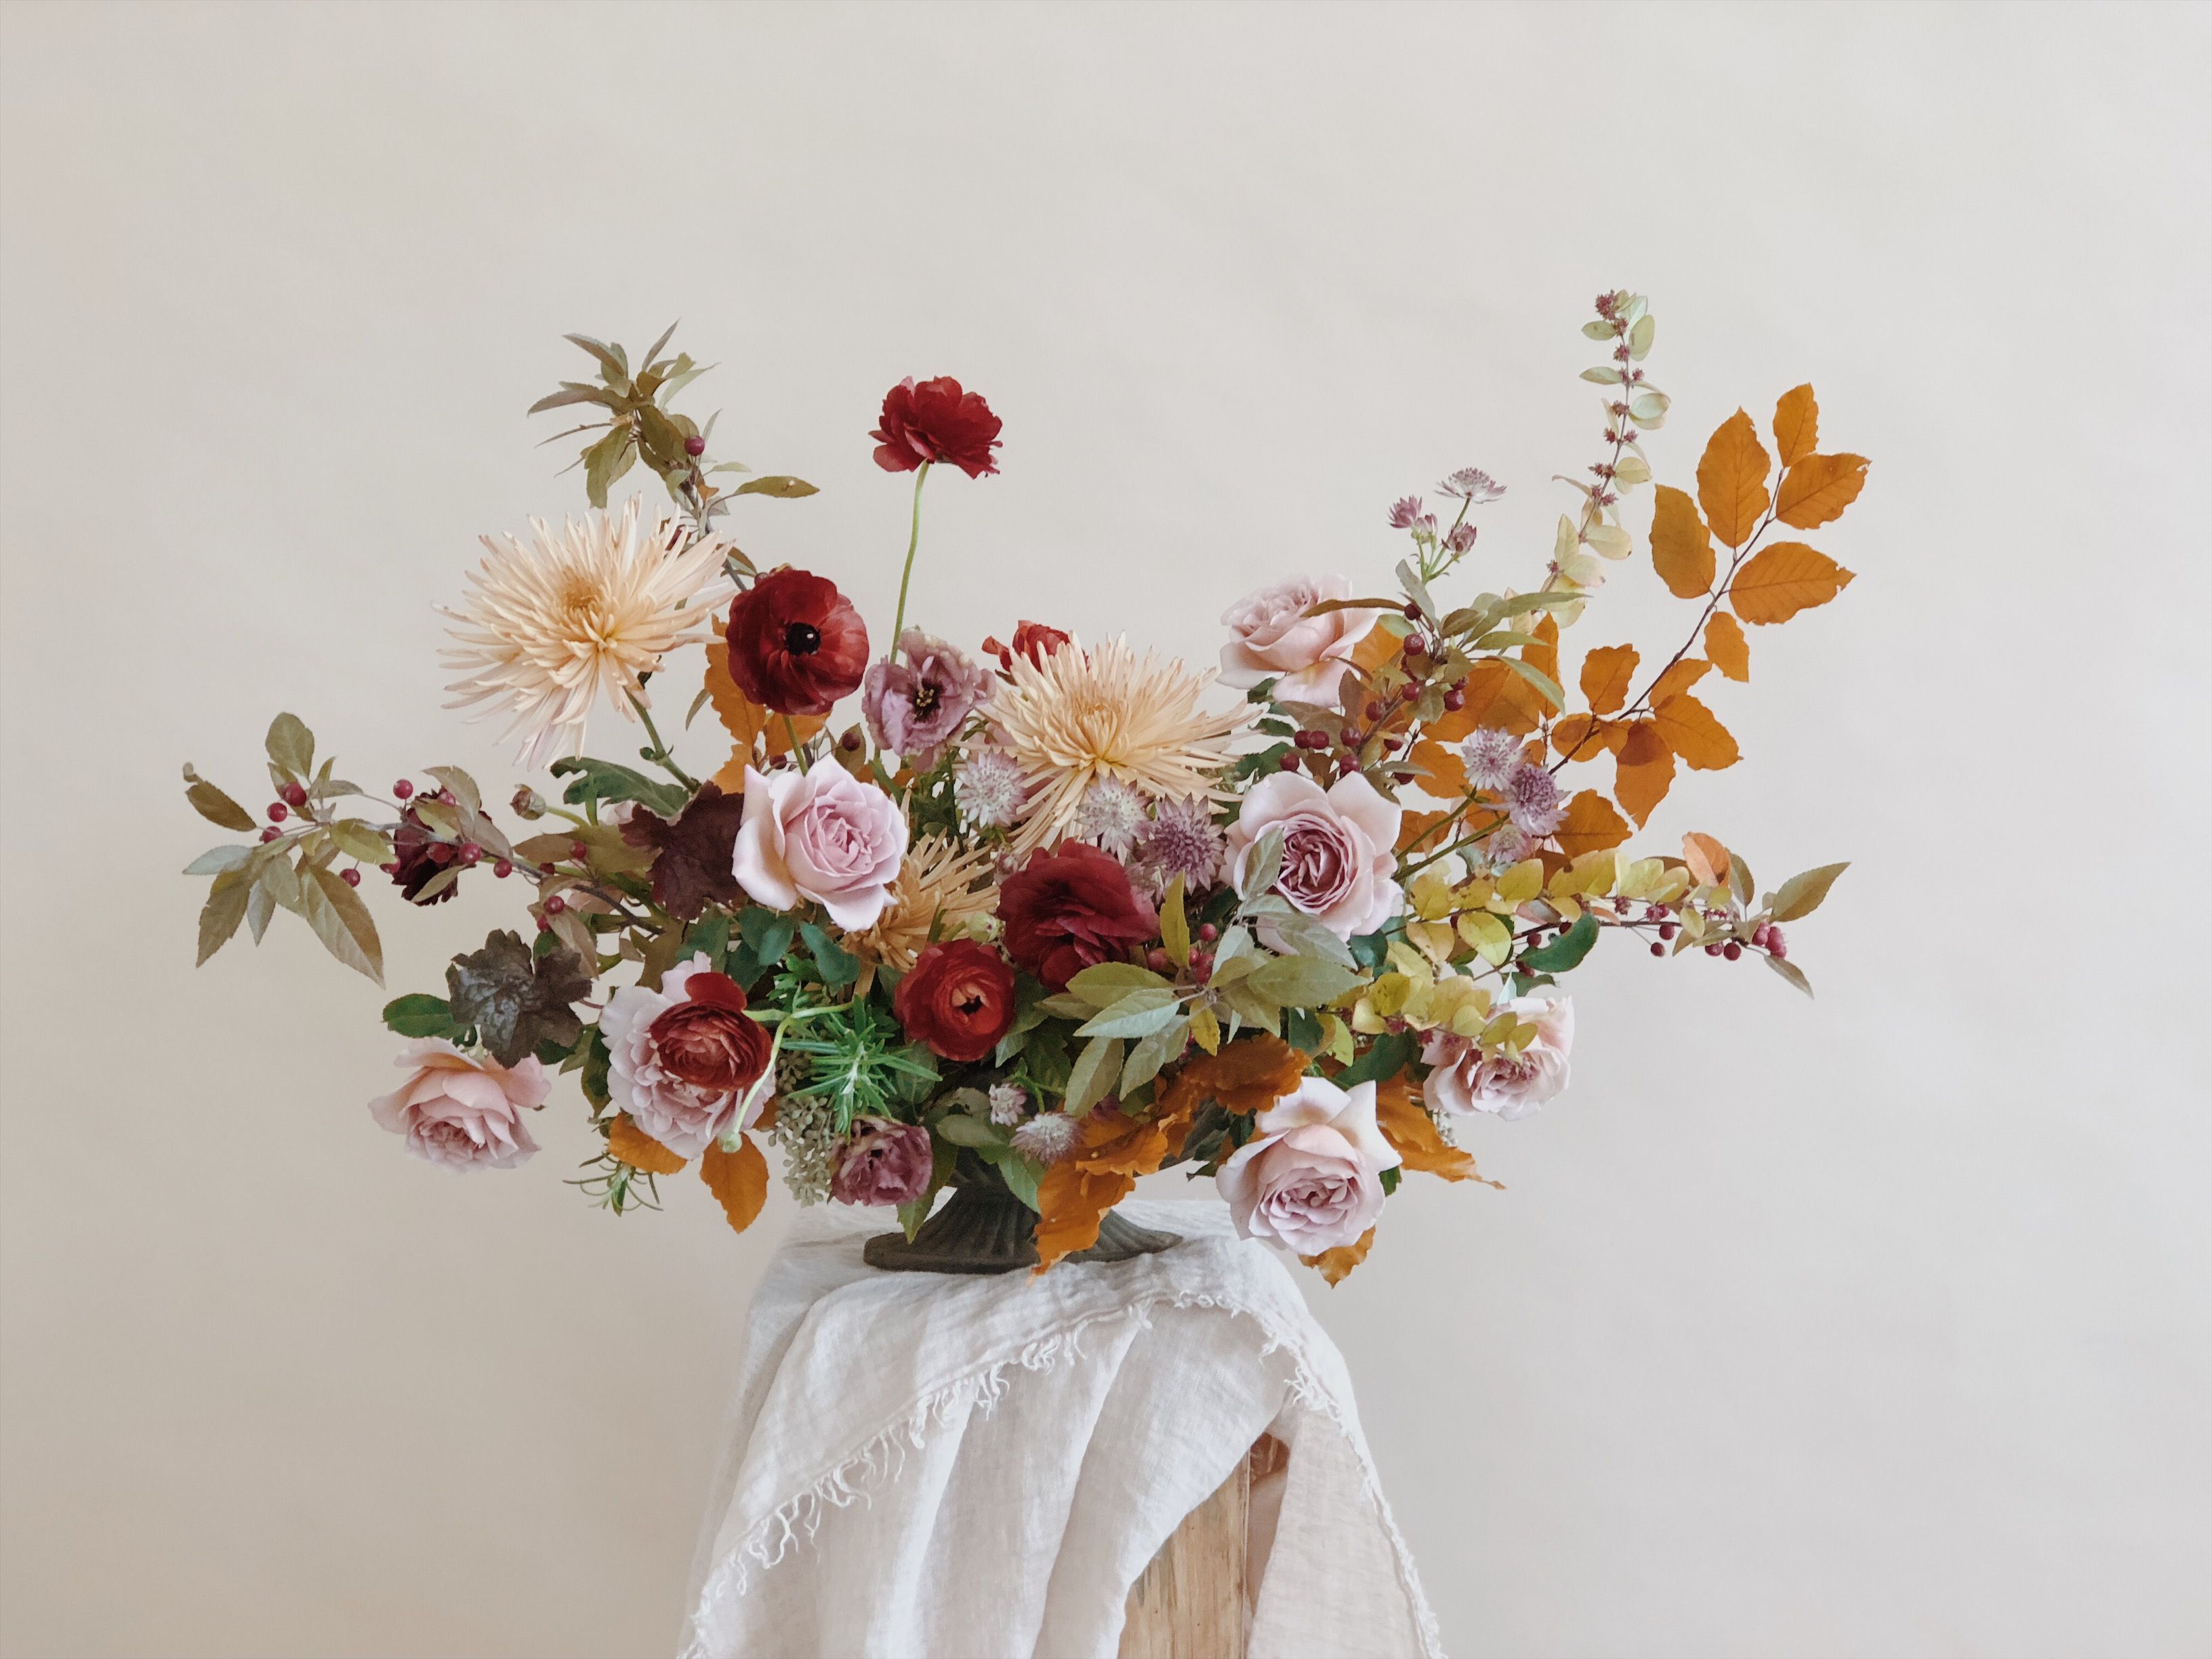 18 Flowers to Grow for Gorgeous Dried Flower Arrangements